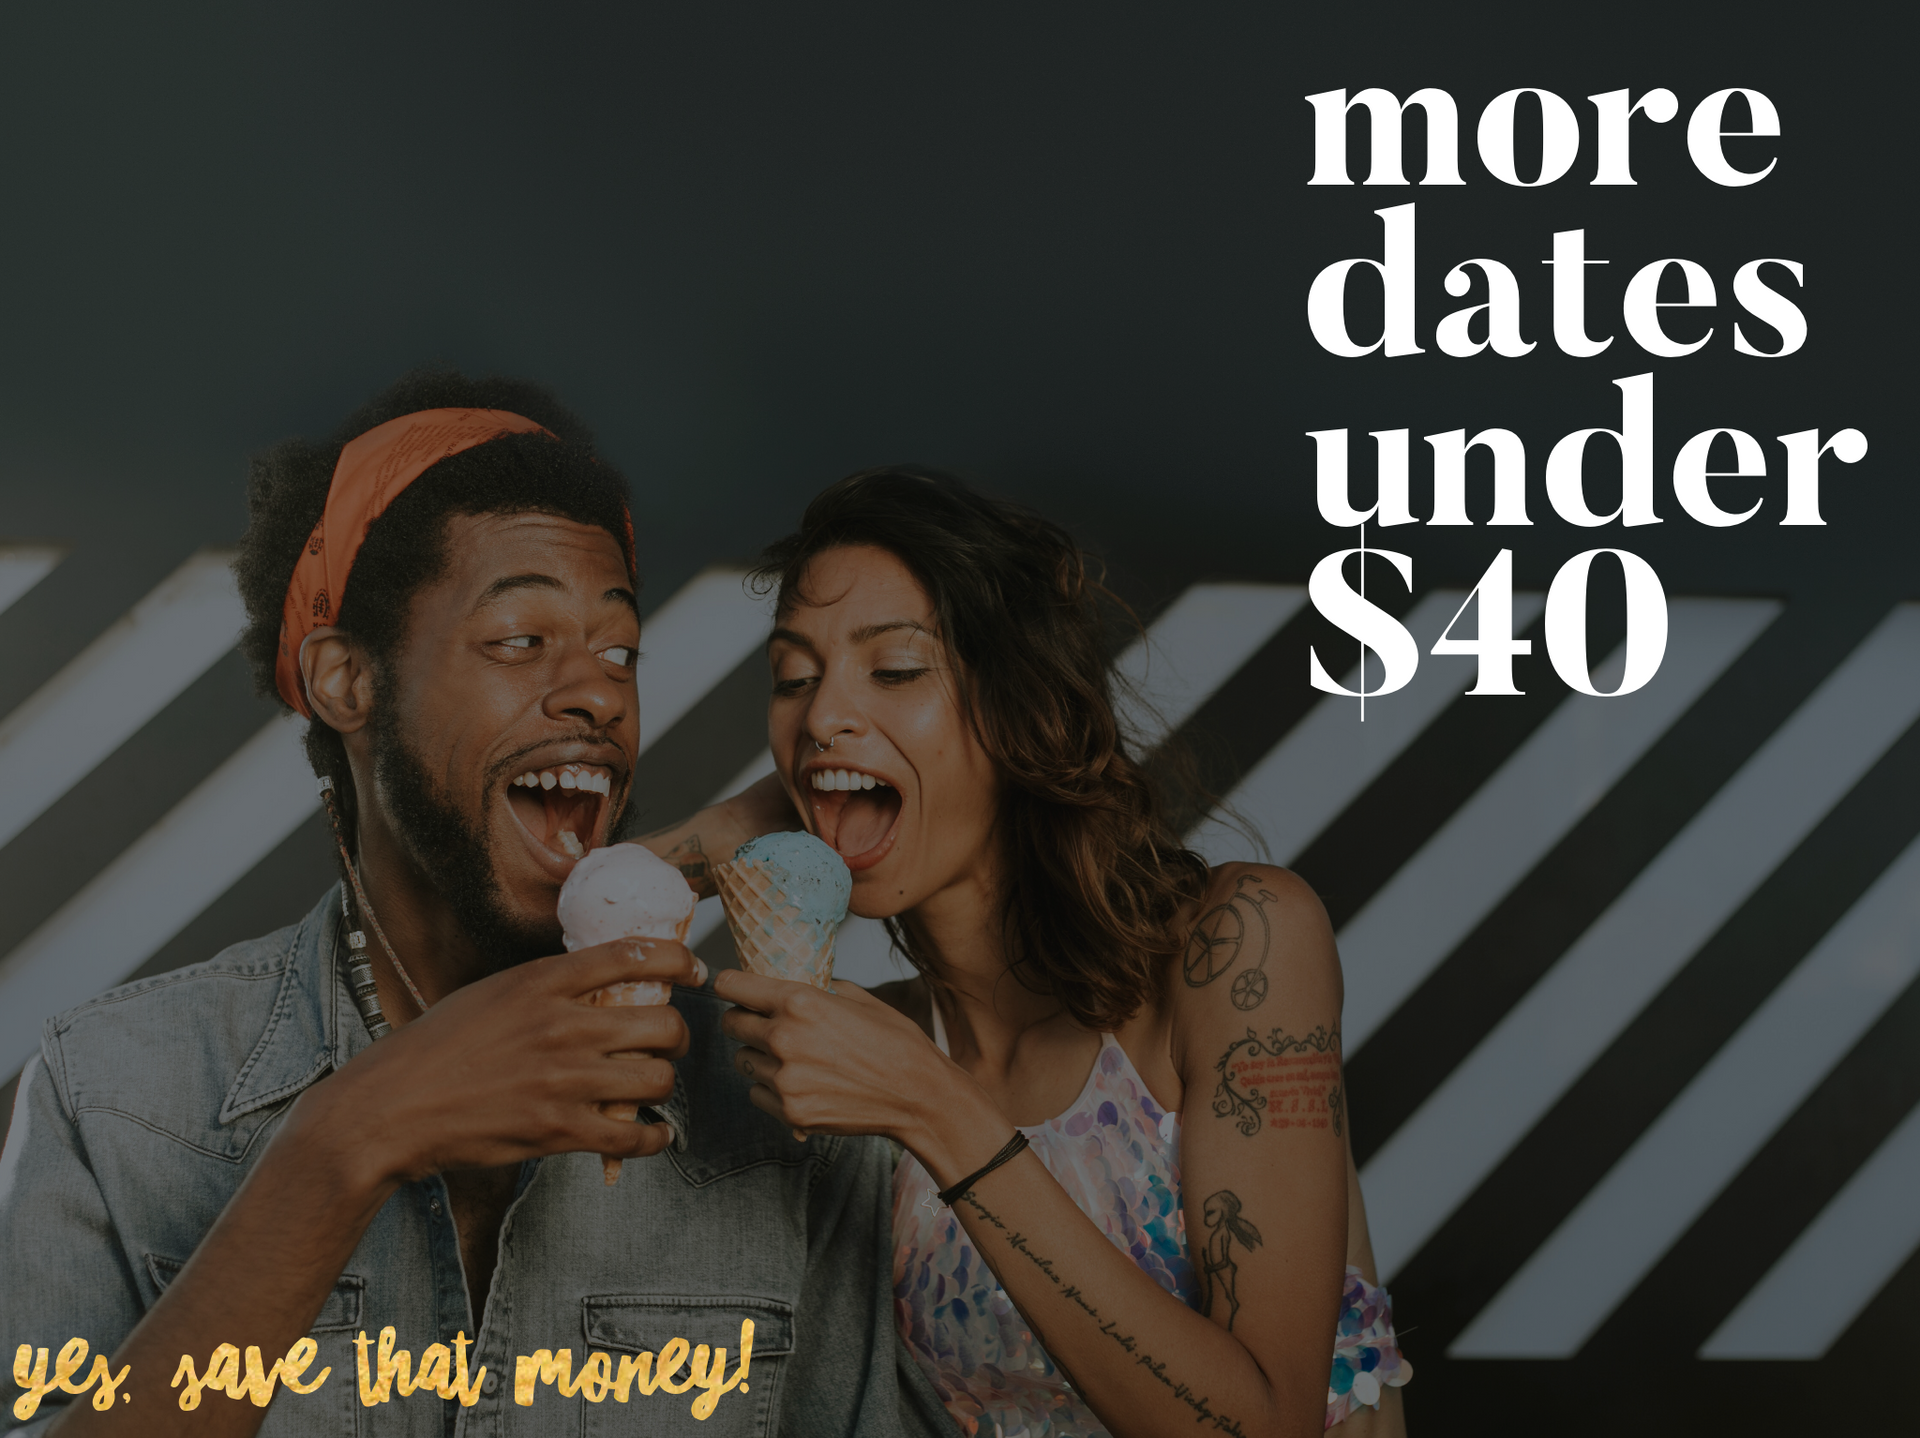 More Dates Under $40: Yes, save that money!